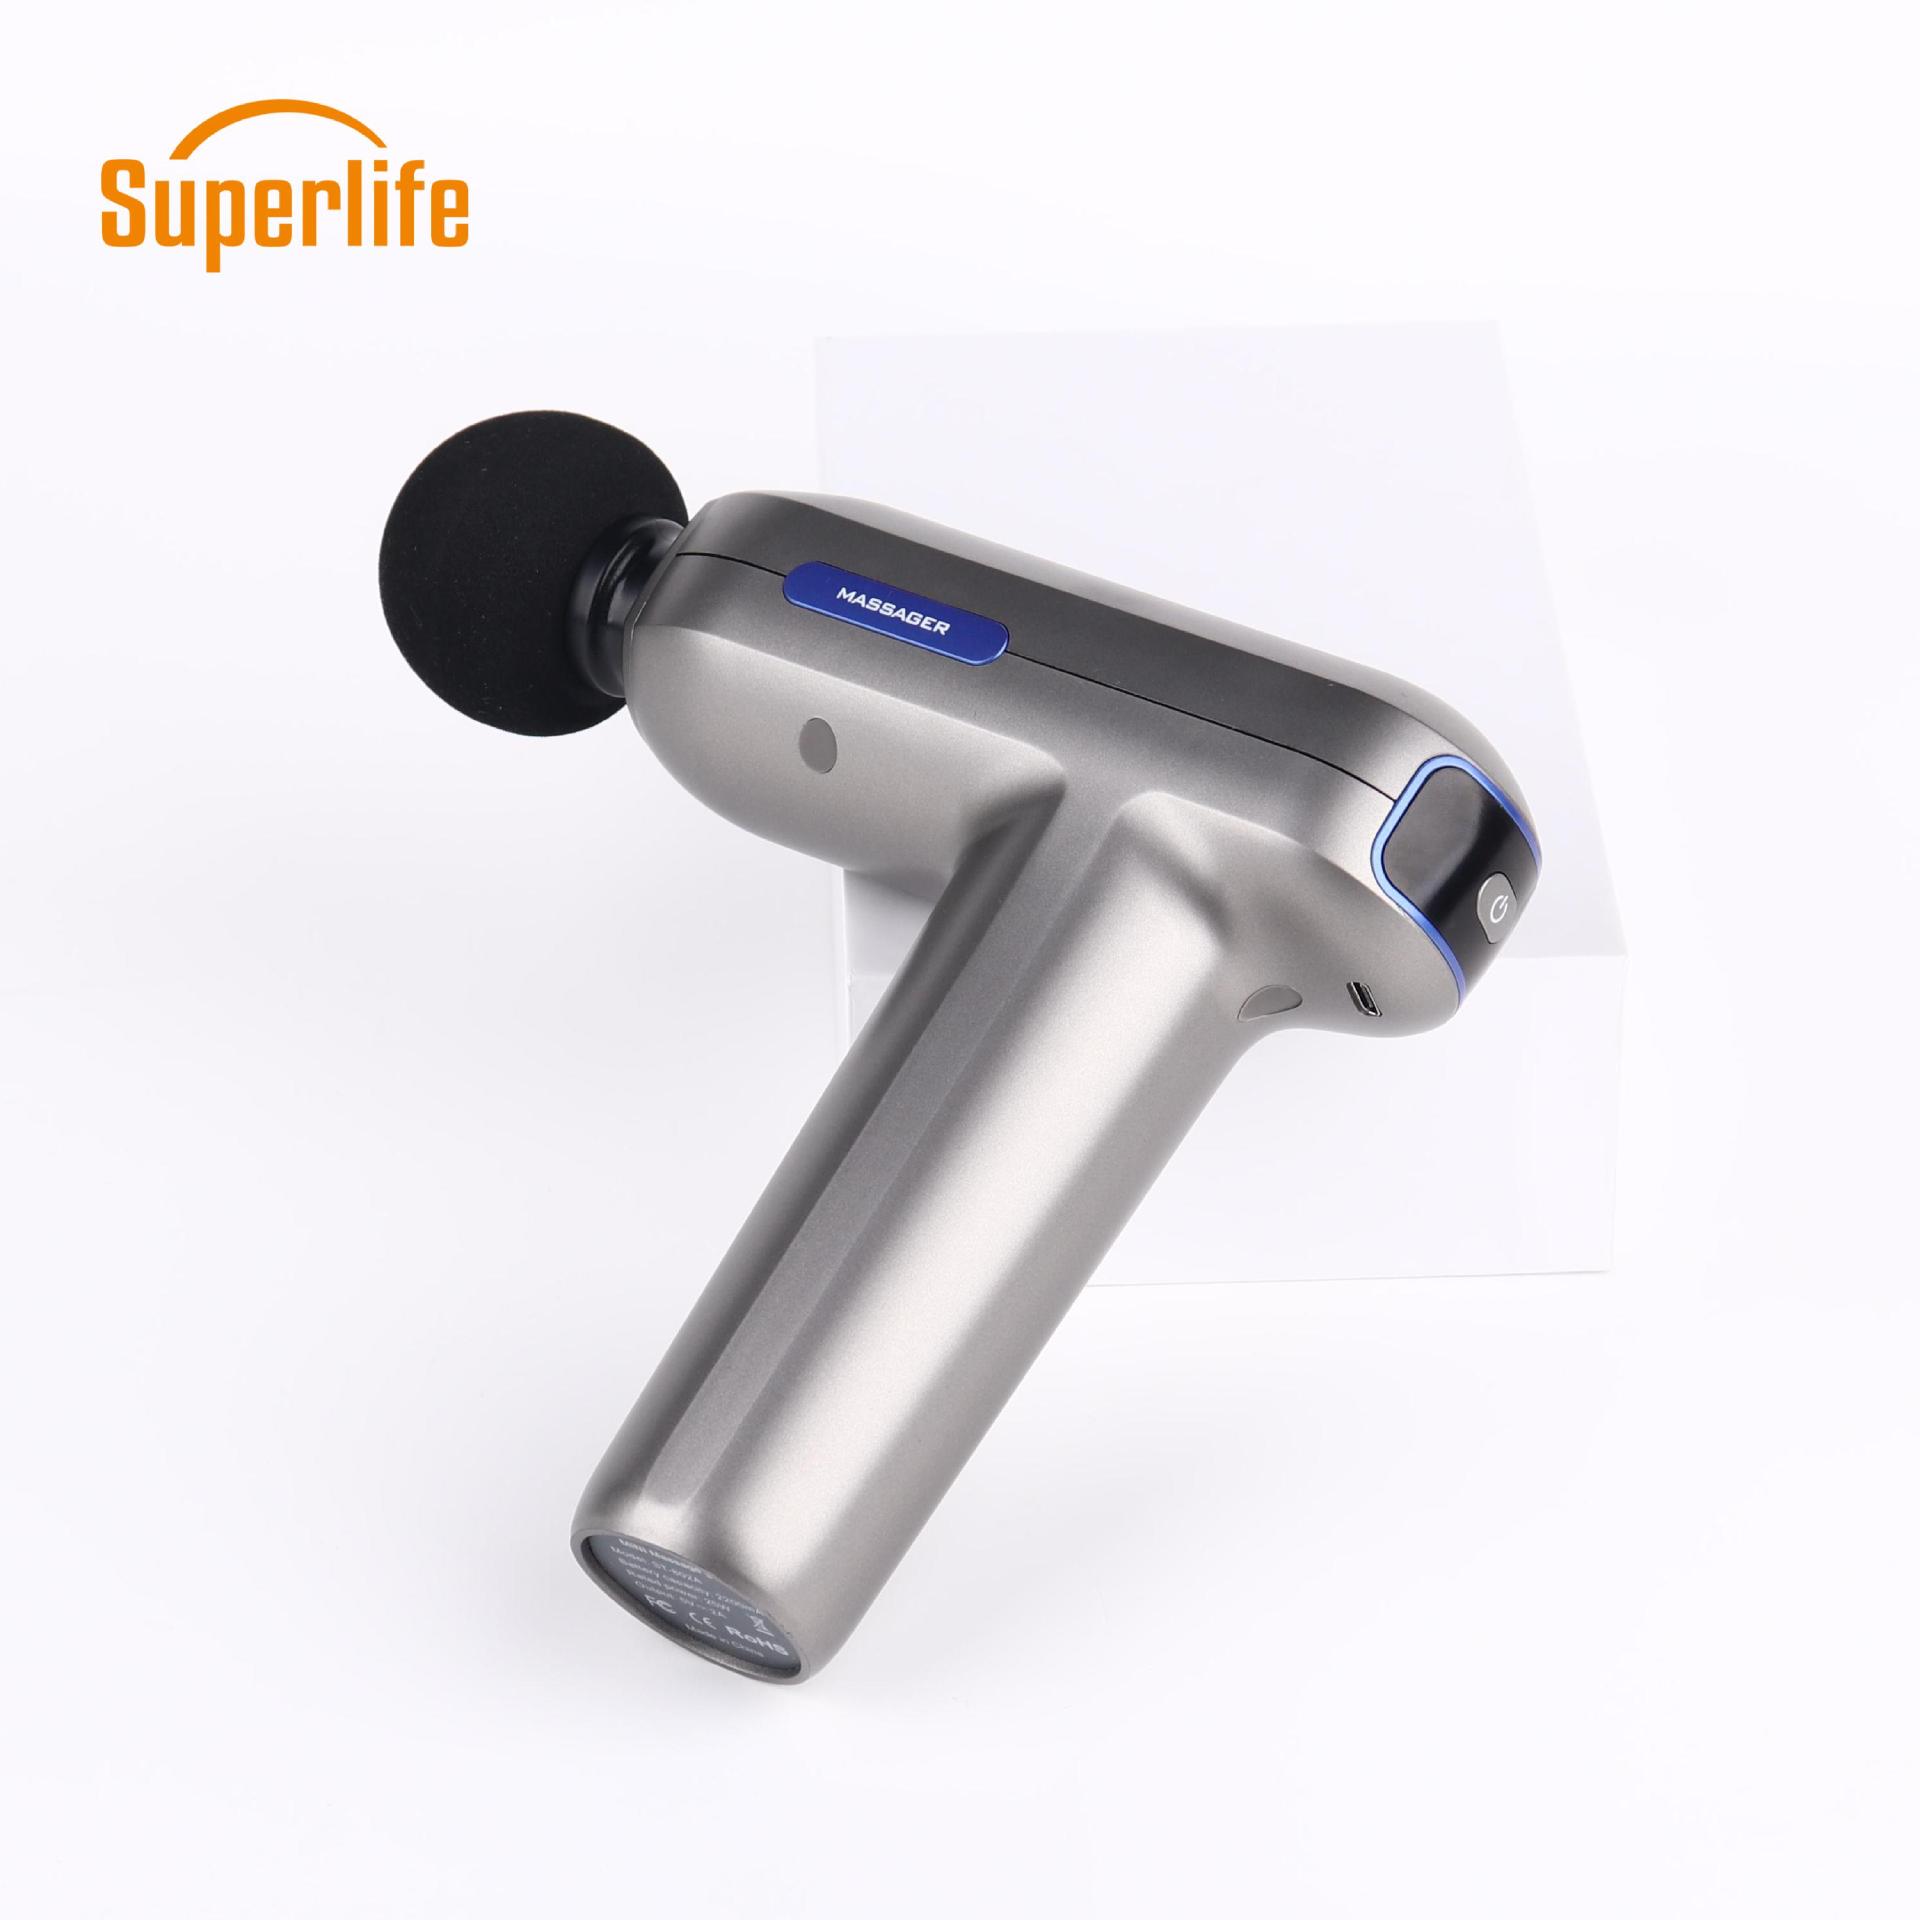 Mini Fascia Massage Gun for Awake Muscle Relief the Soreness with 5 Speed Modes and 6 Massage Heads